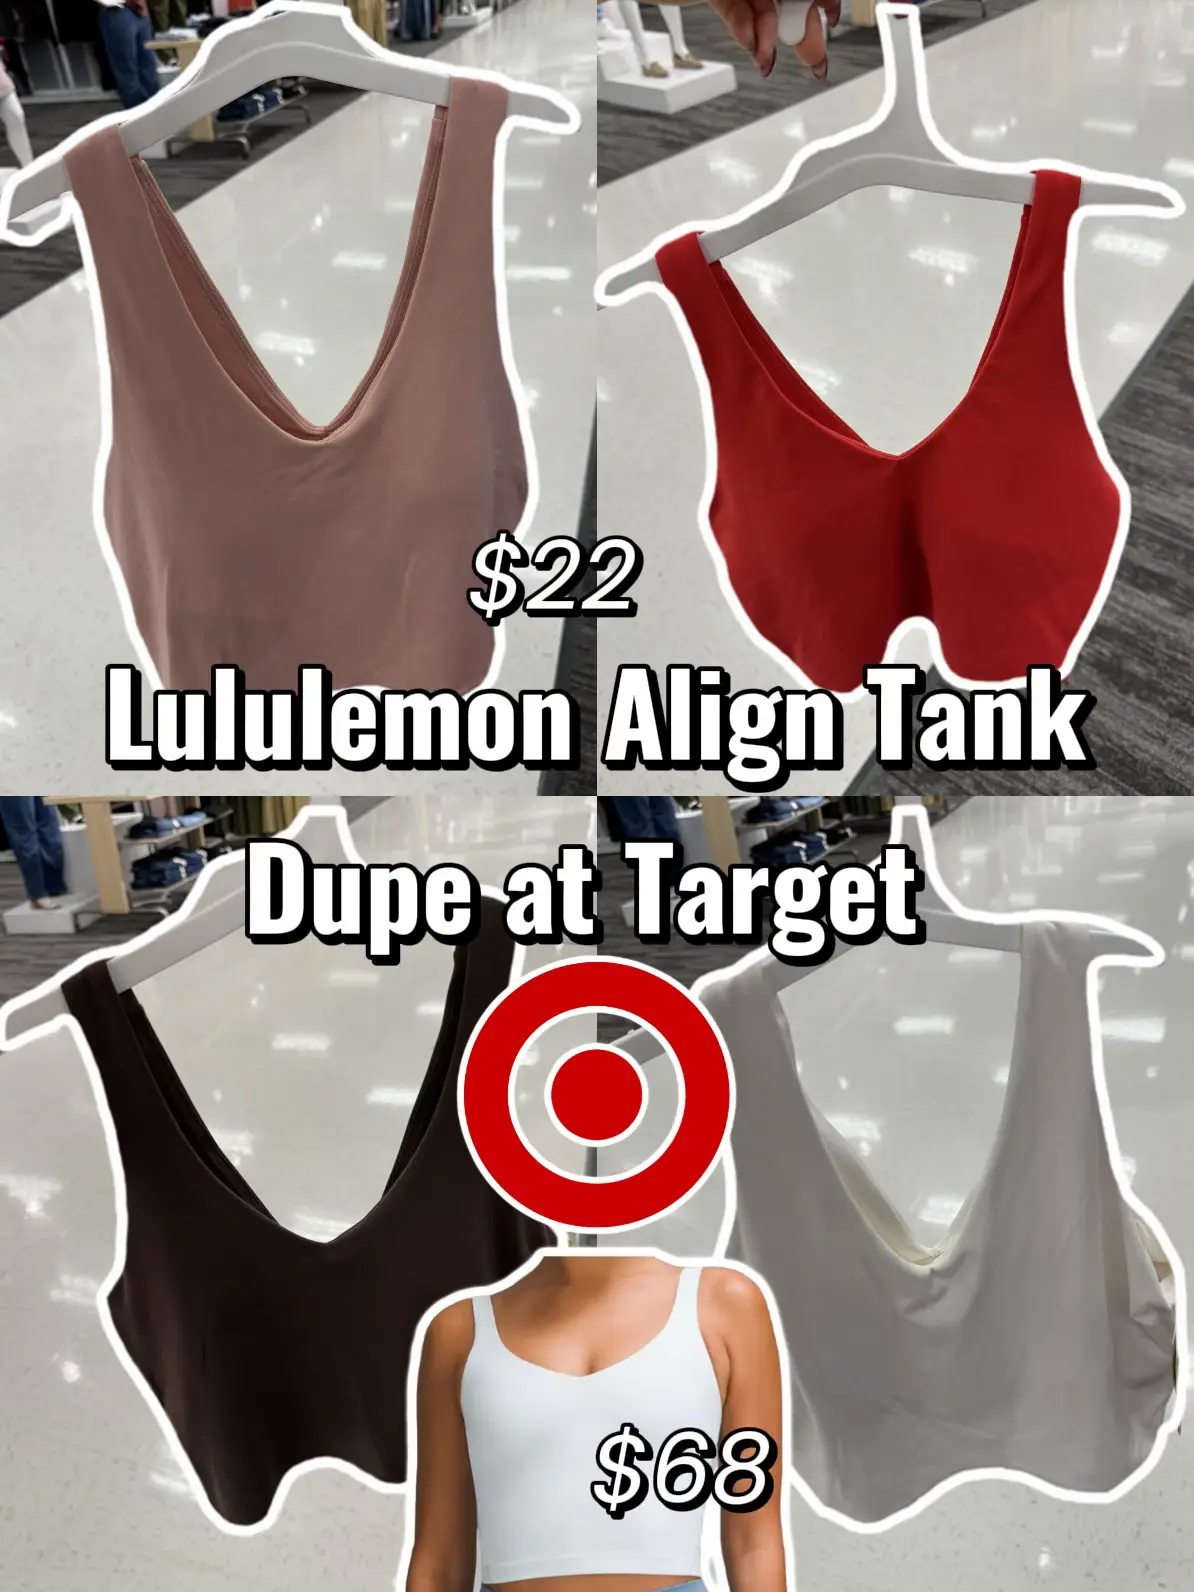 Need help with Align tank, remained undecided. : r/lululemon